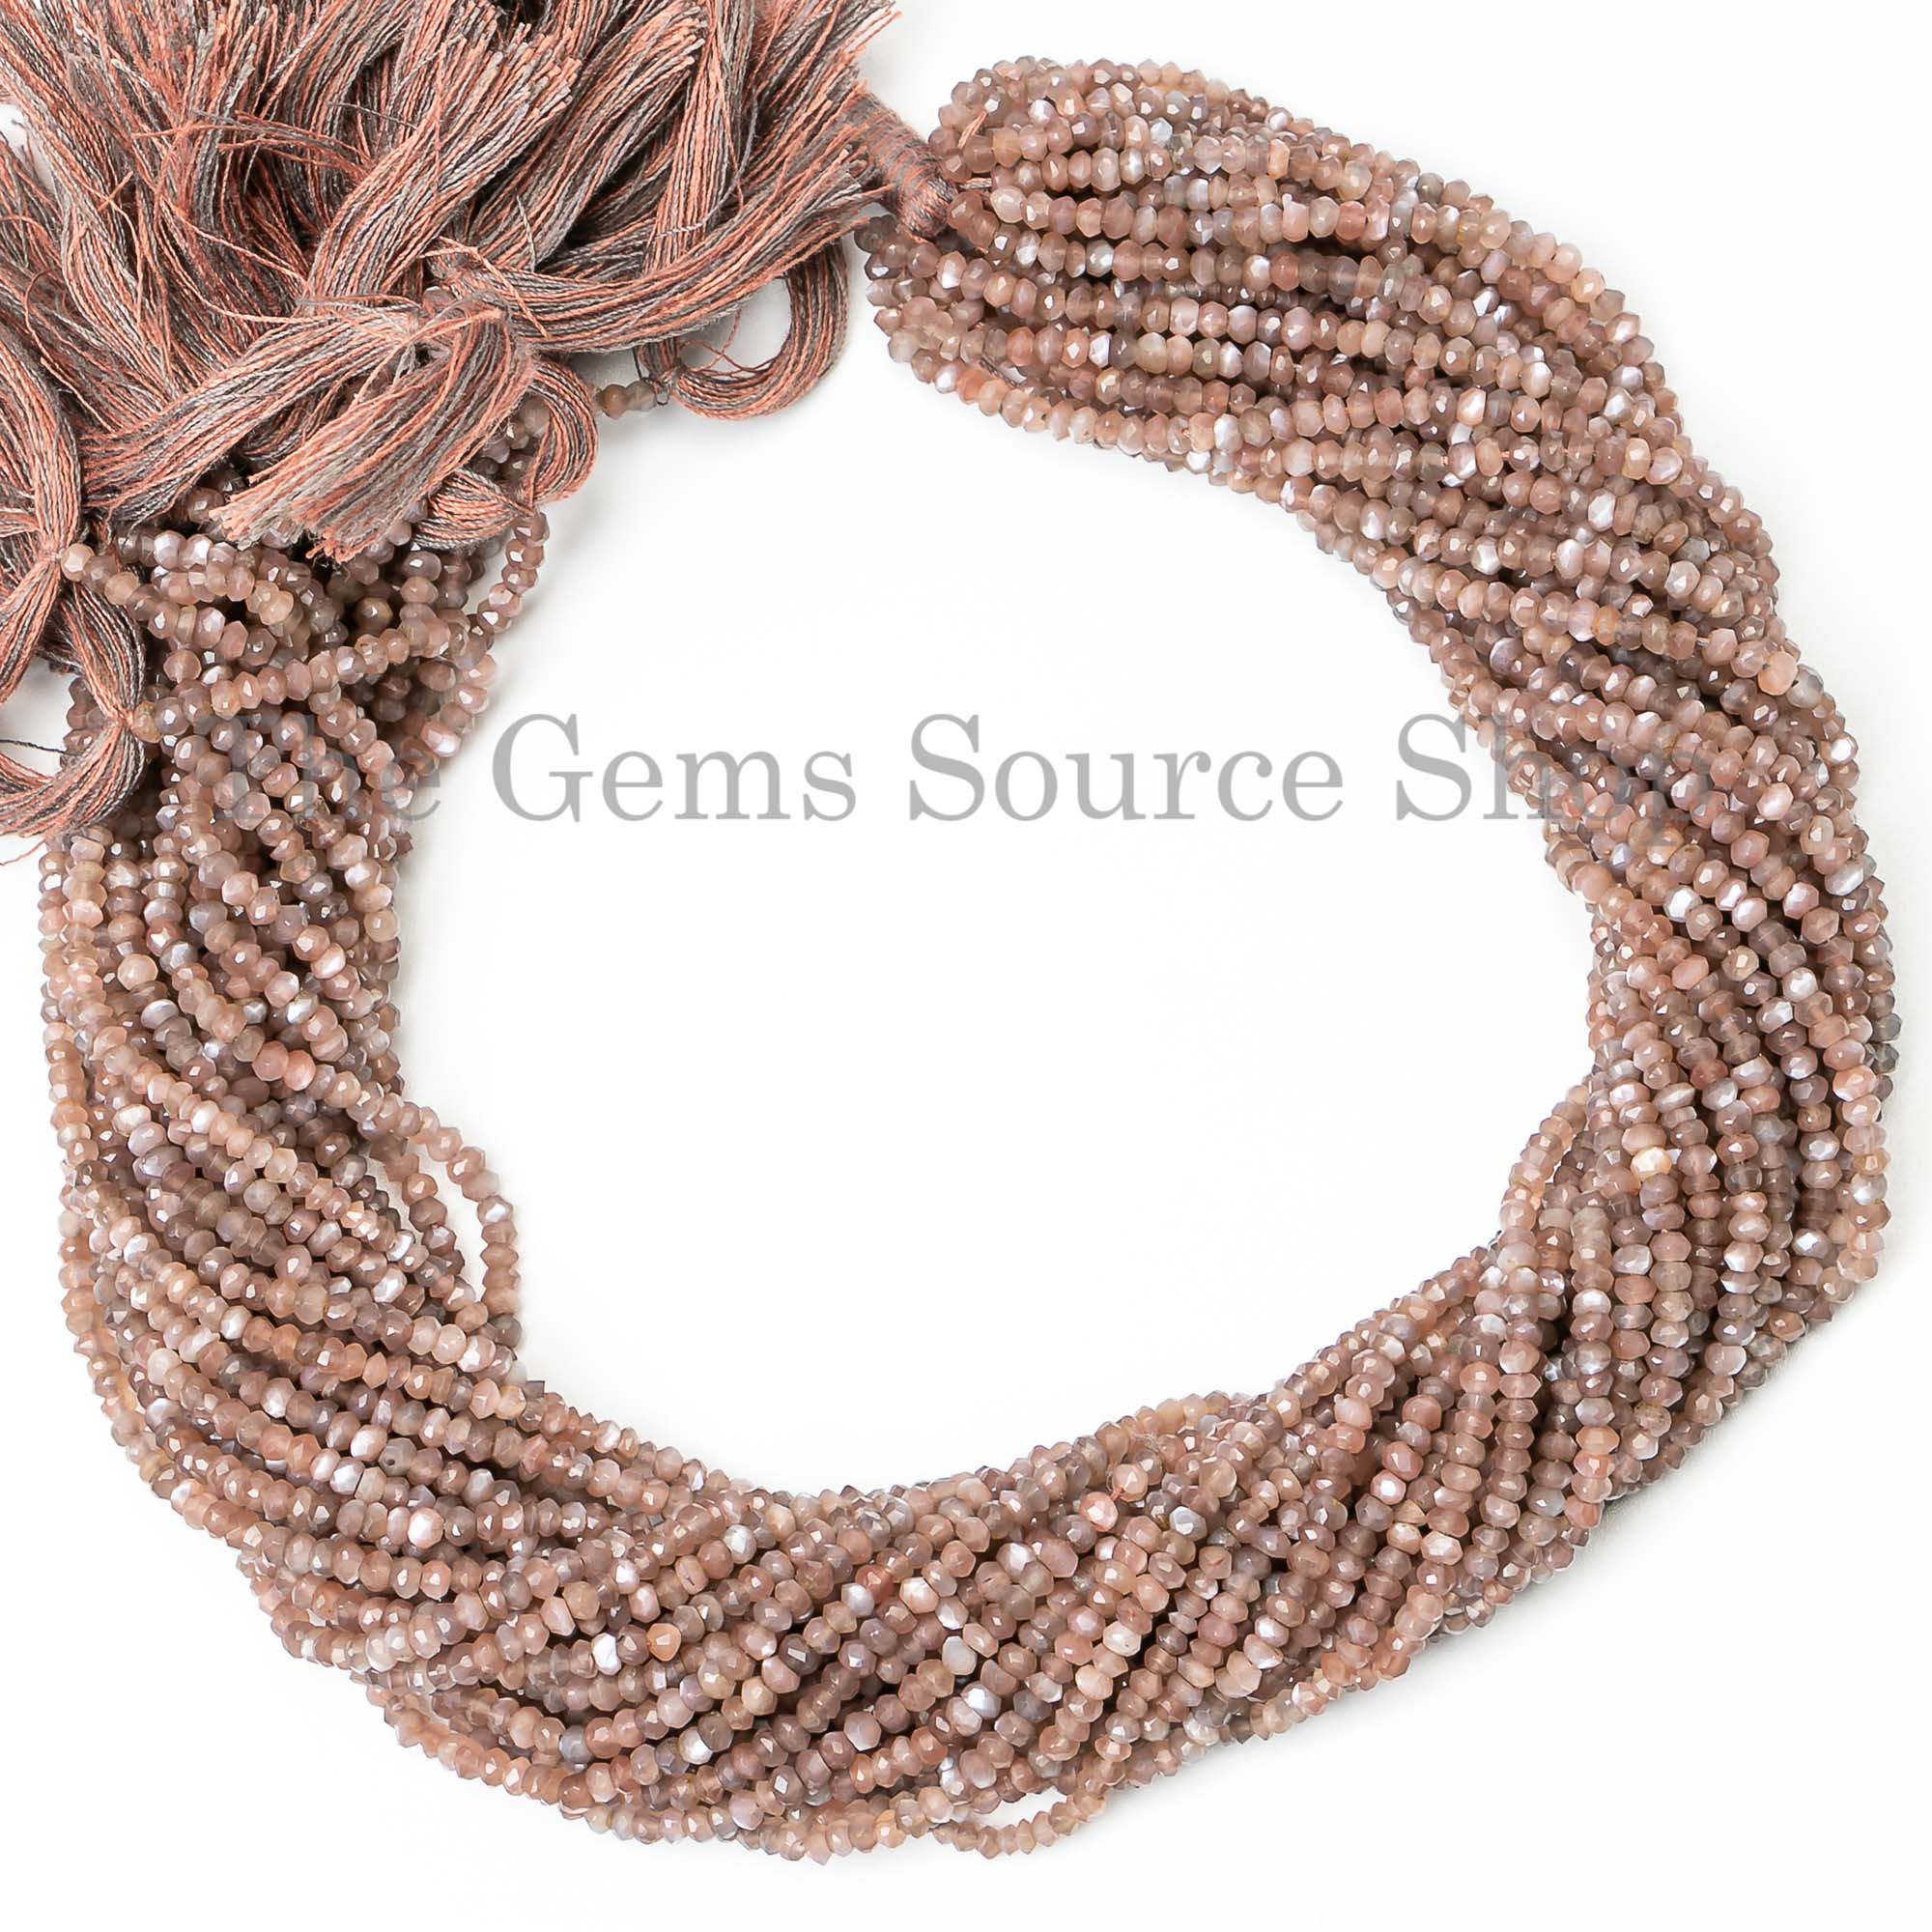 Chocolate Moonstone Faceted Rondelle Beads, Faceted Moonstone Beads, Wholesale Beads